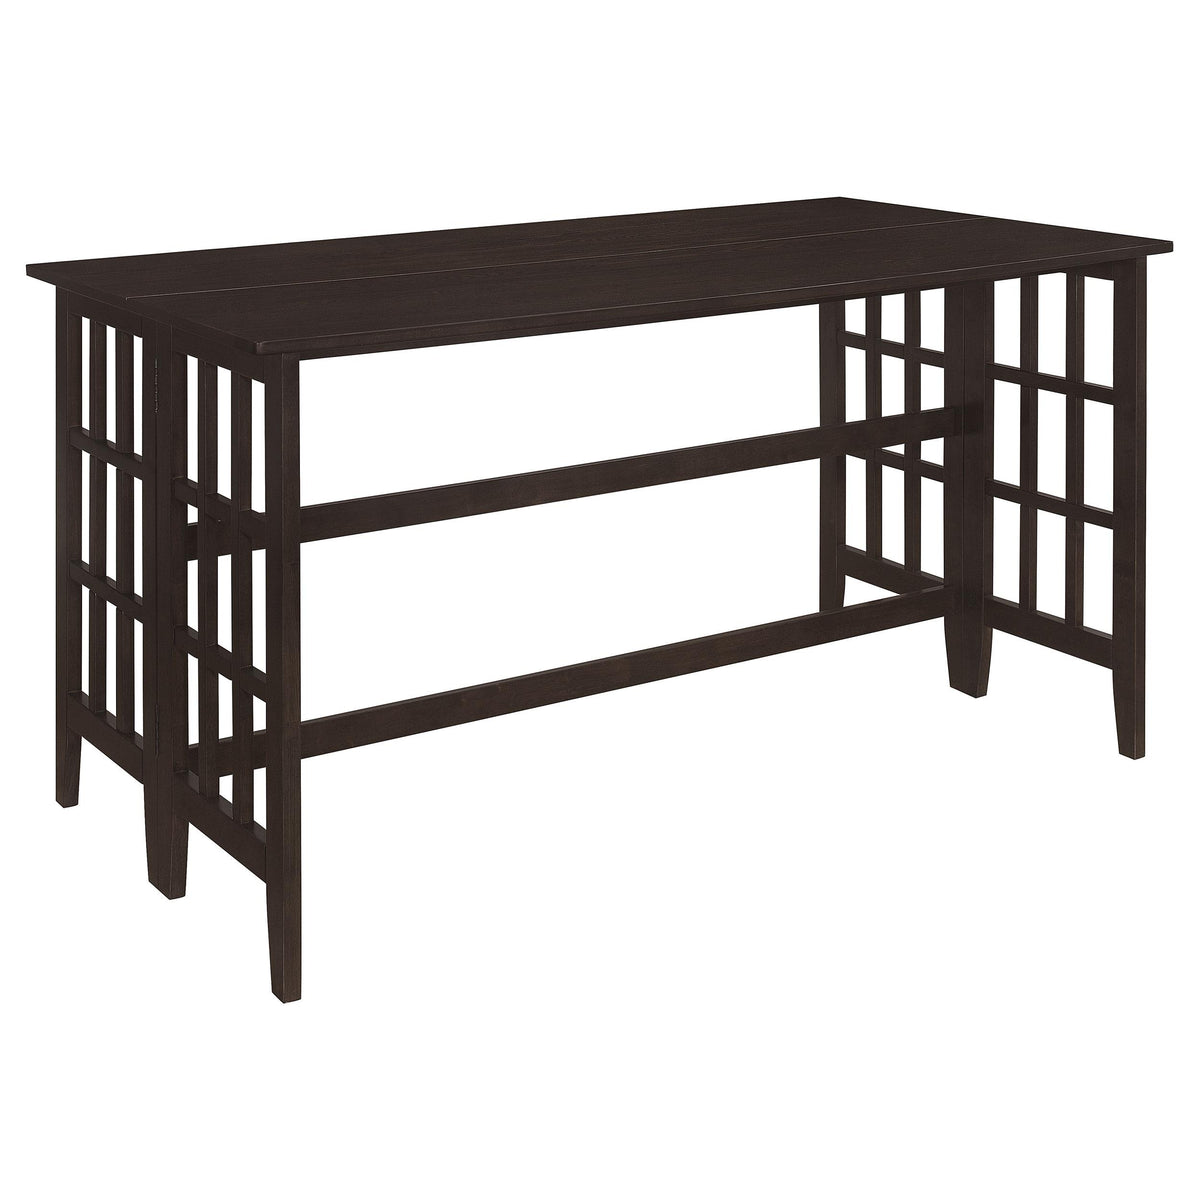 G193478 Counter Ht Table  Las Vegas Furniture Stores